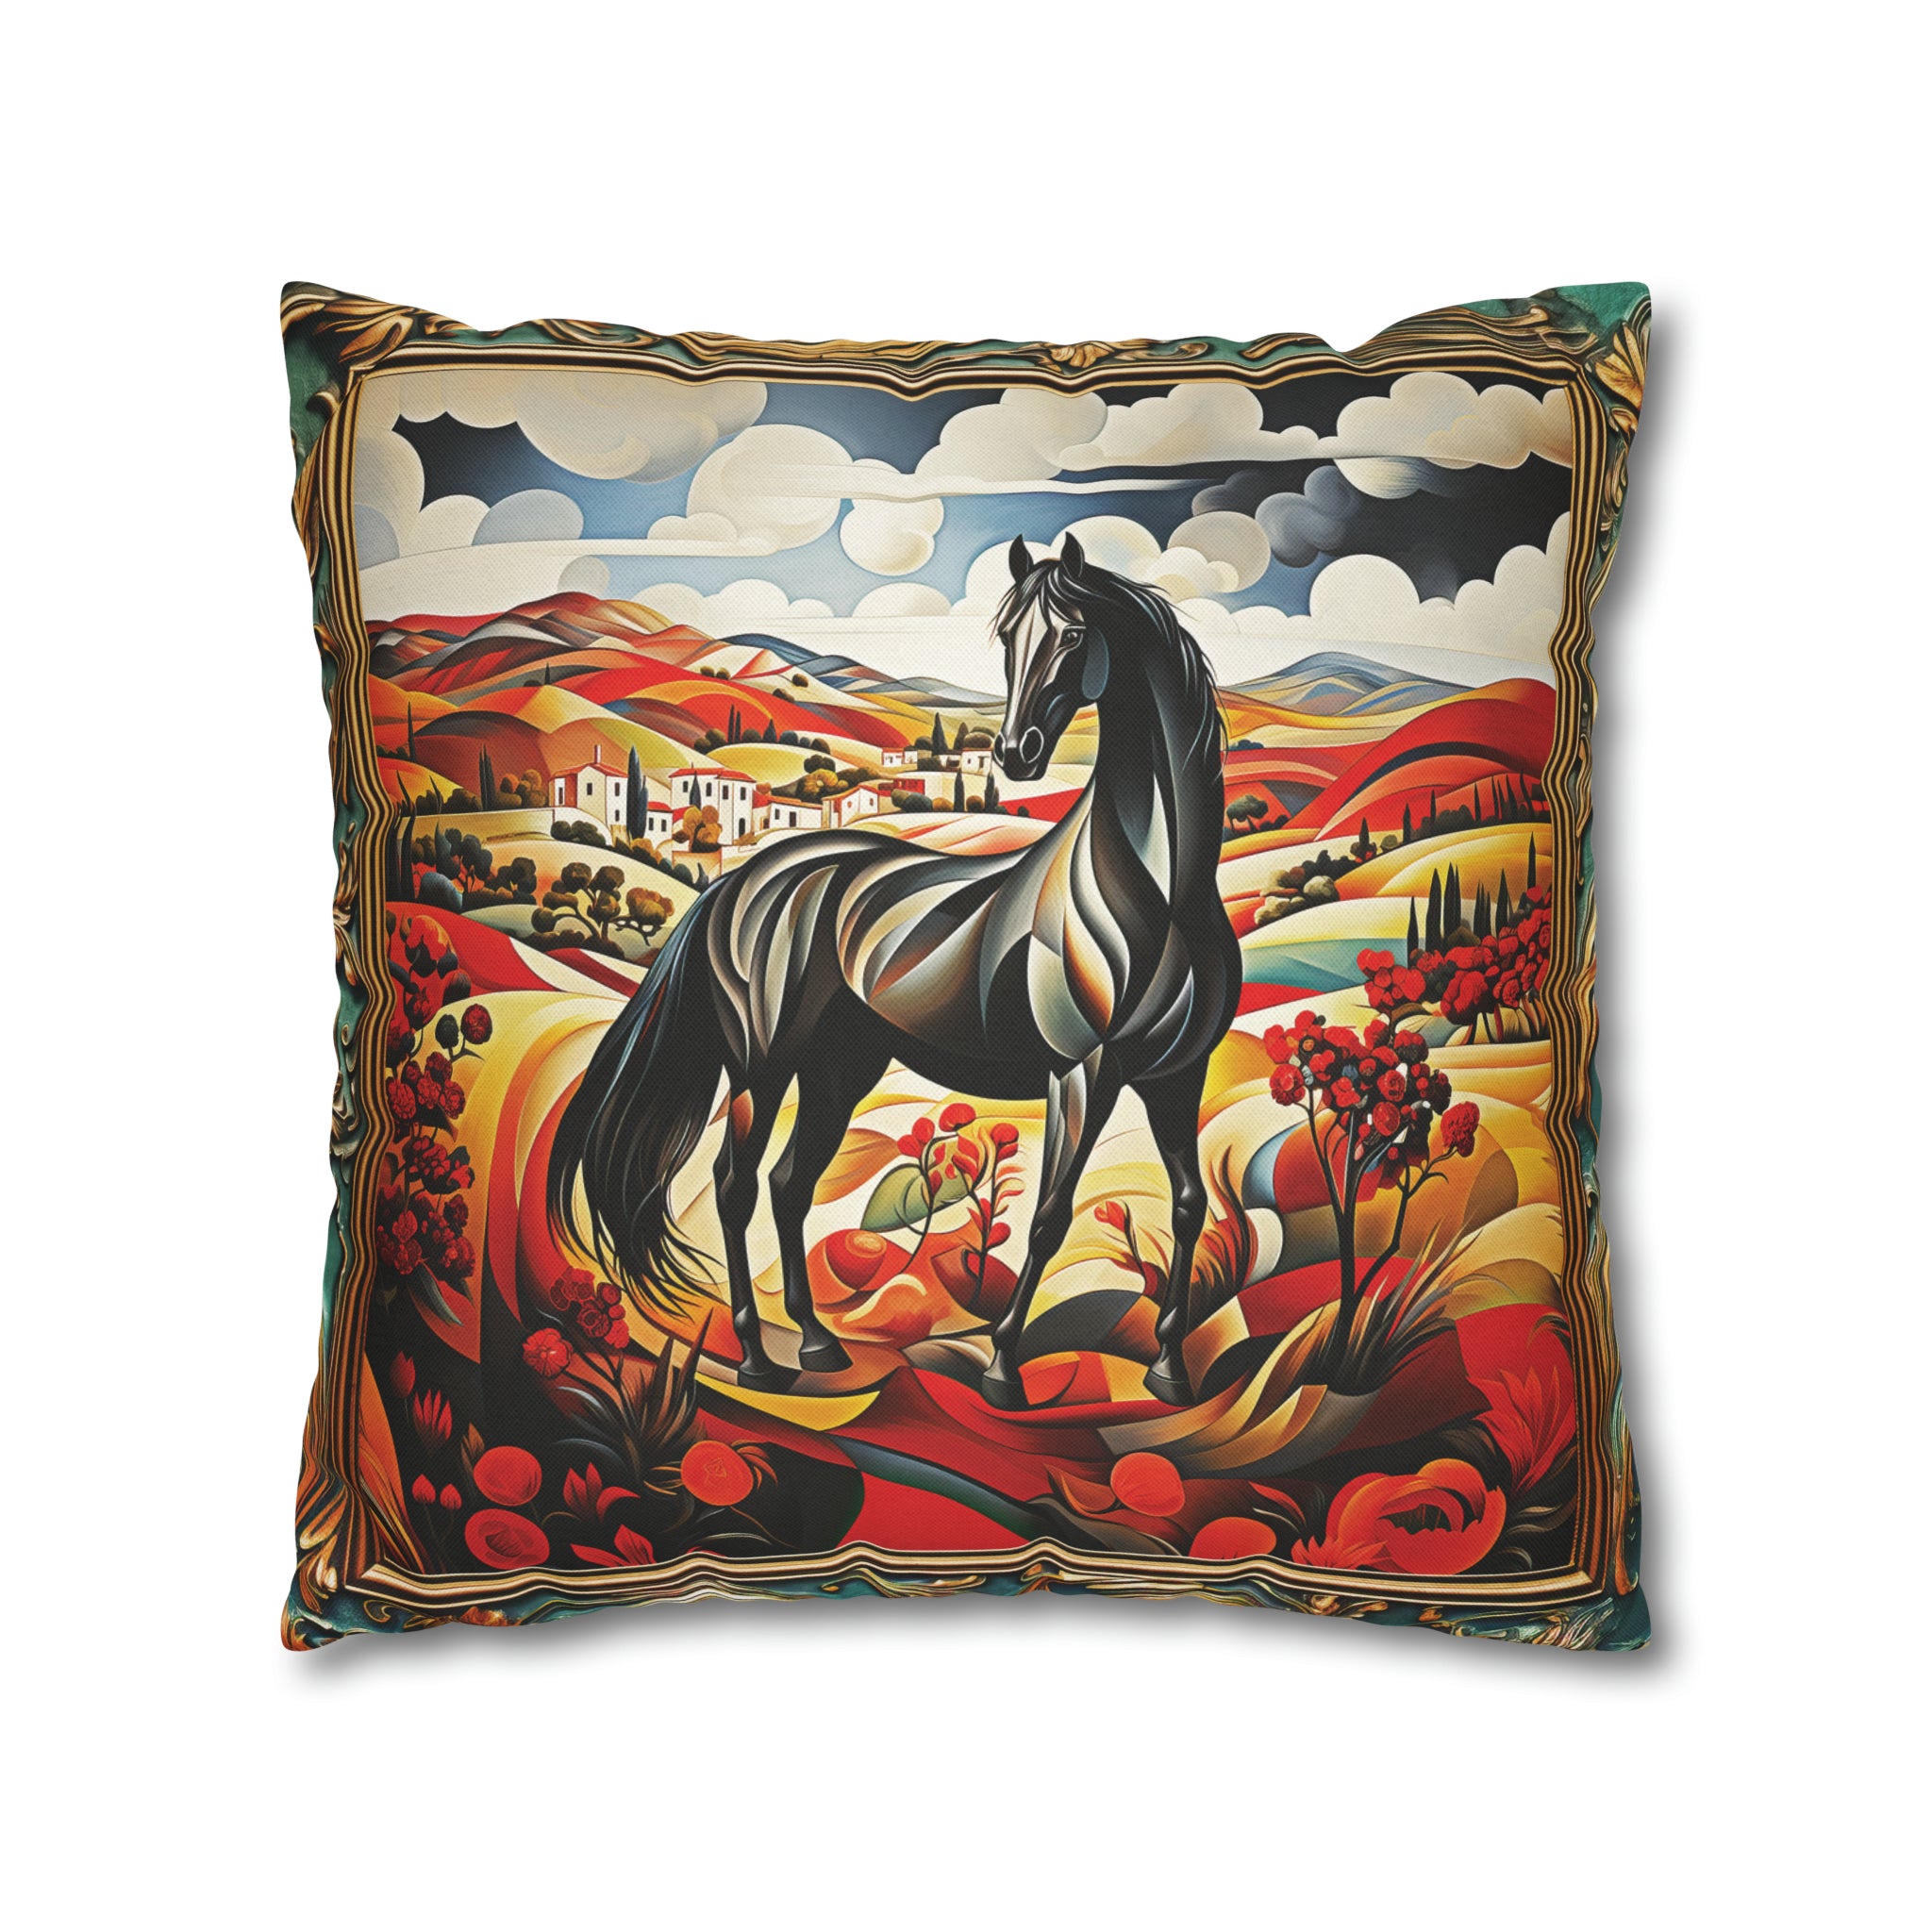 Square Pillow Case 18" x 18", CASE ONLY, no pillow form, original Art ,Colorful, Beautiful Black Horse on a Colorful Landscape with Red Fields of Flowers